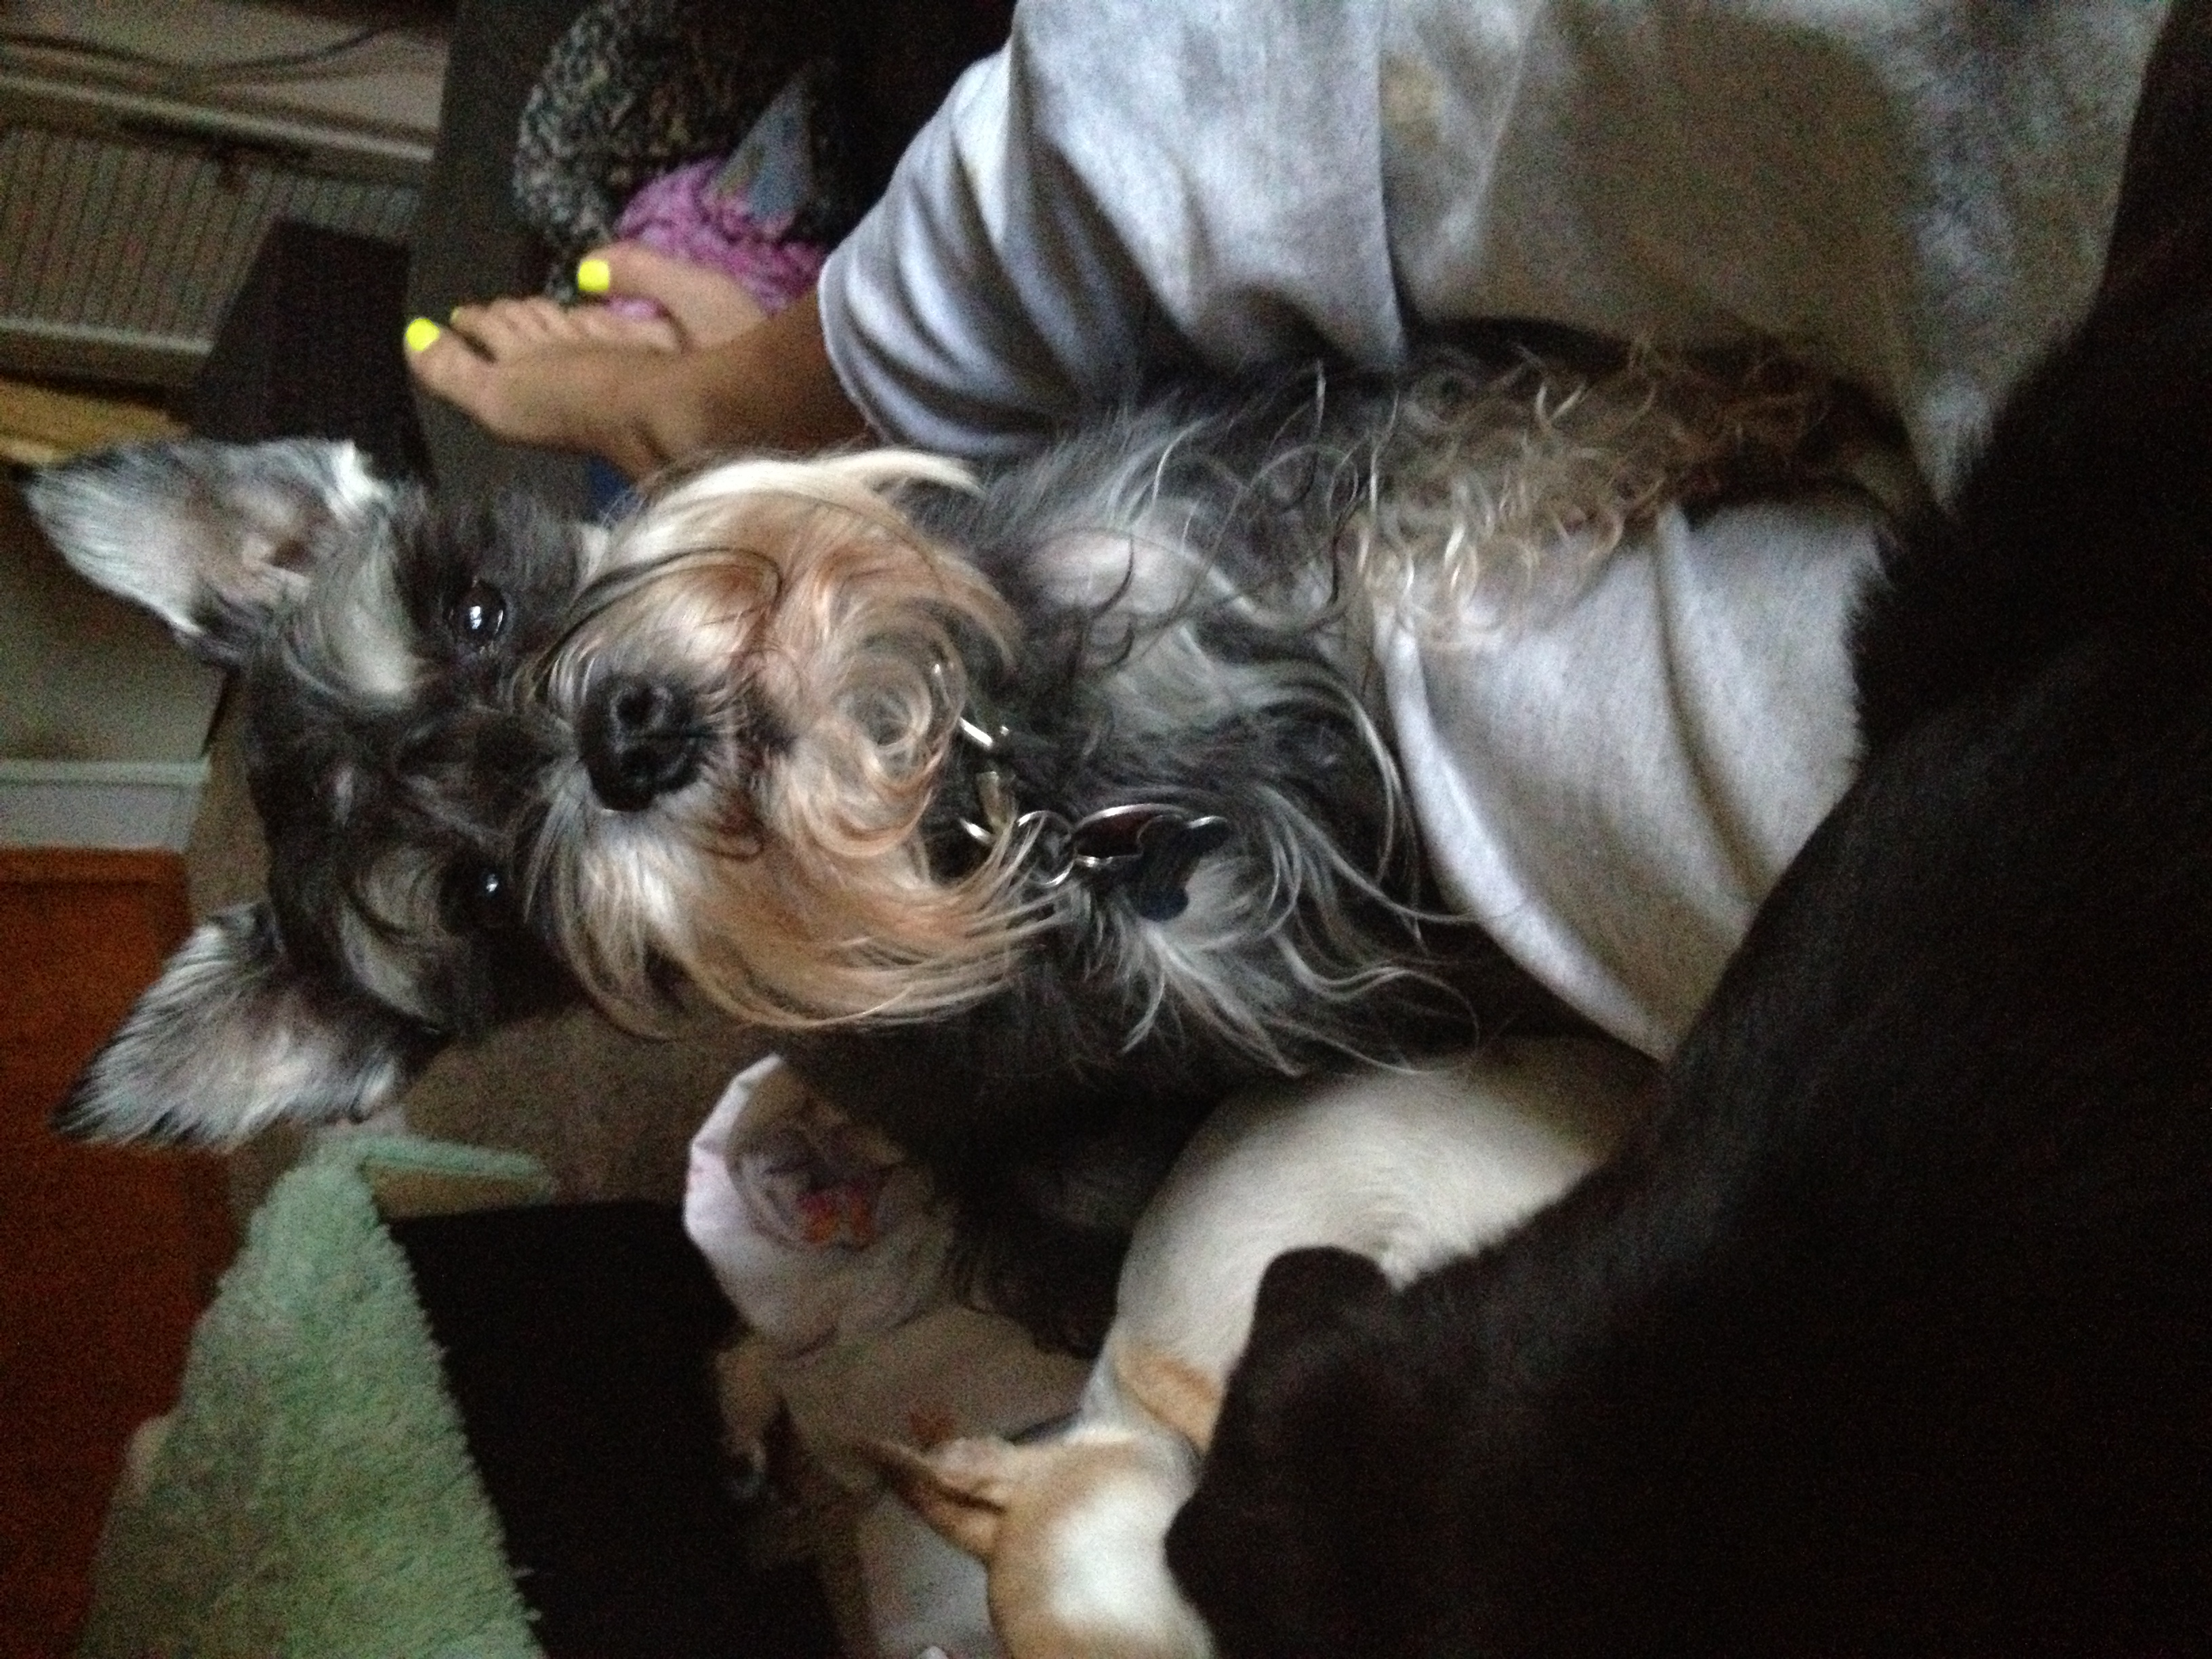 Snuggling with a schnauzer! I love lazy days with these babes ...